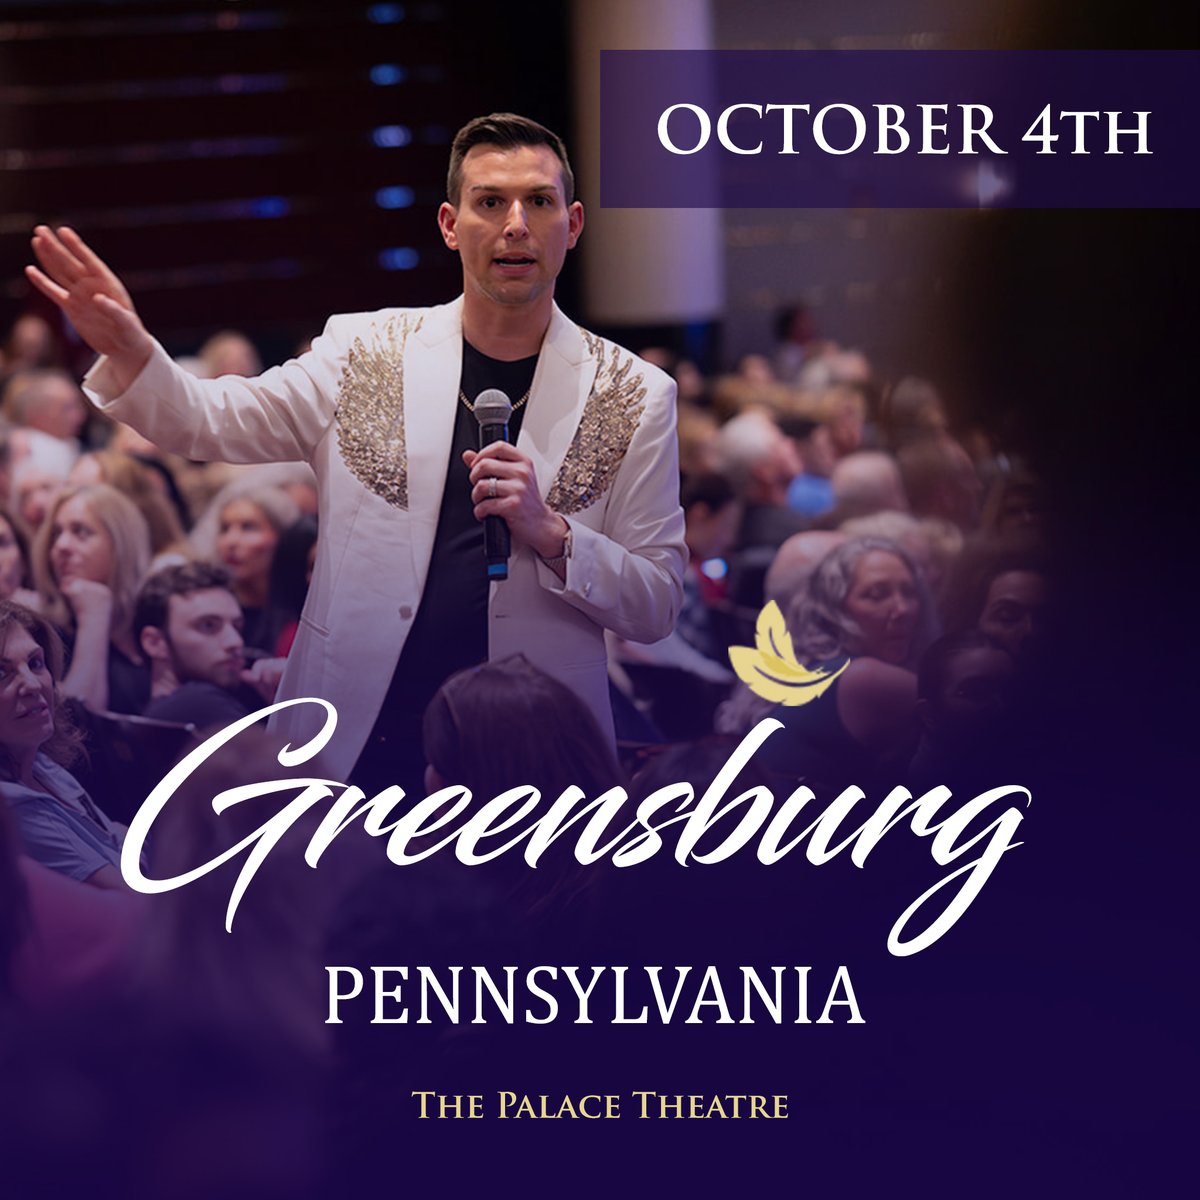 🌟 Greensburg, get ready for a night to remember. Join Matt Fraser at The Palace Theatre on October 4th and experience LIVE psychic readings. Tickets are selling fast, secure yours at MeetMattFraser.com